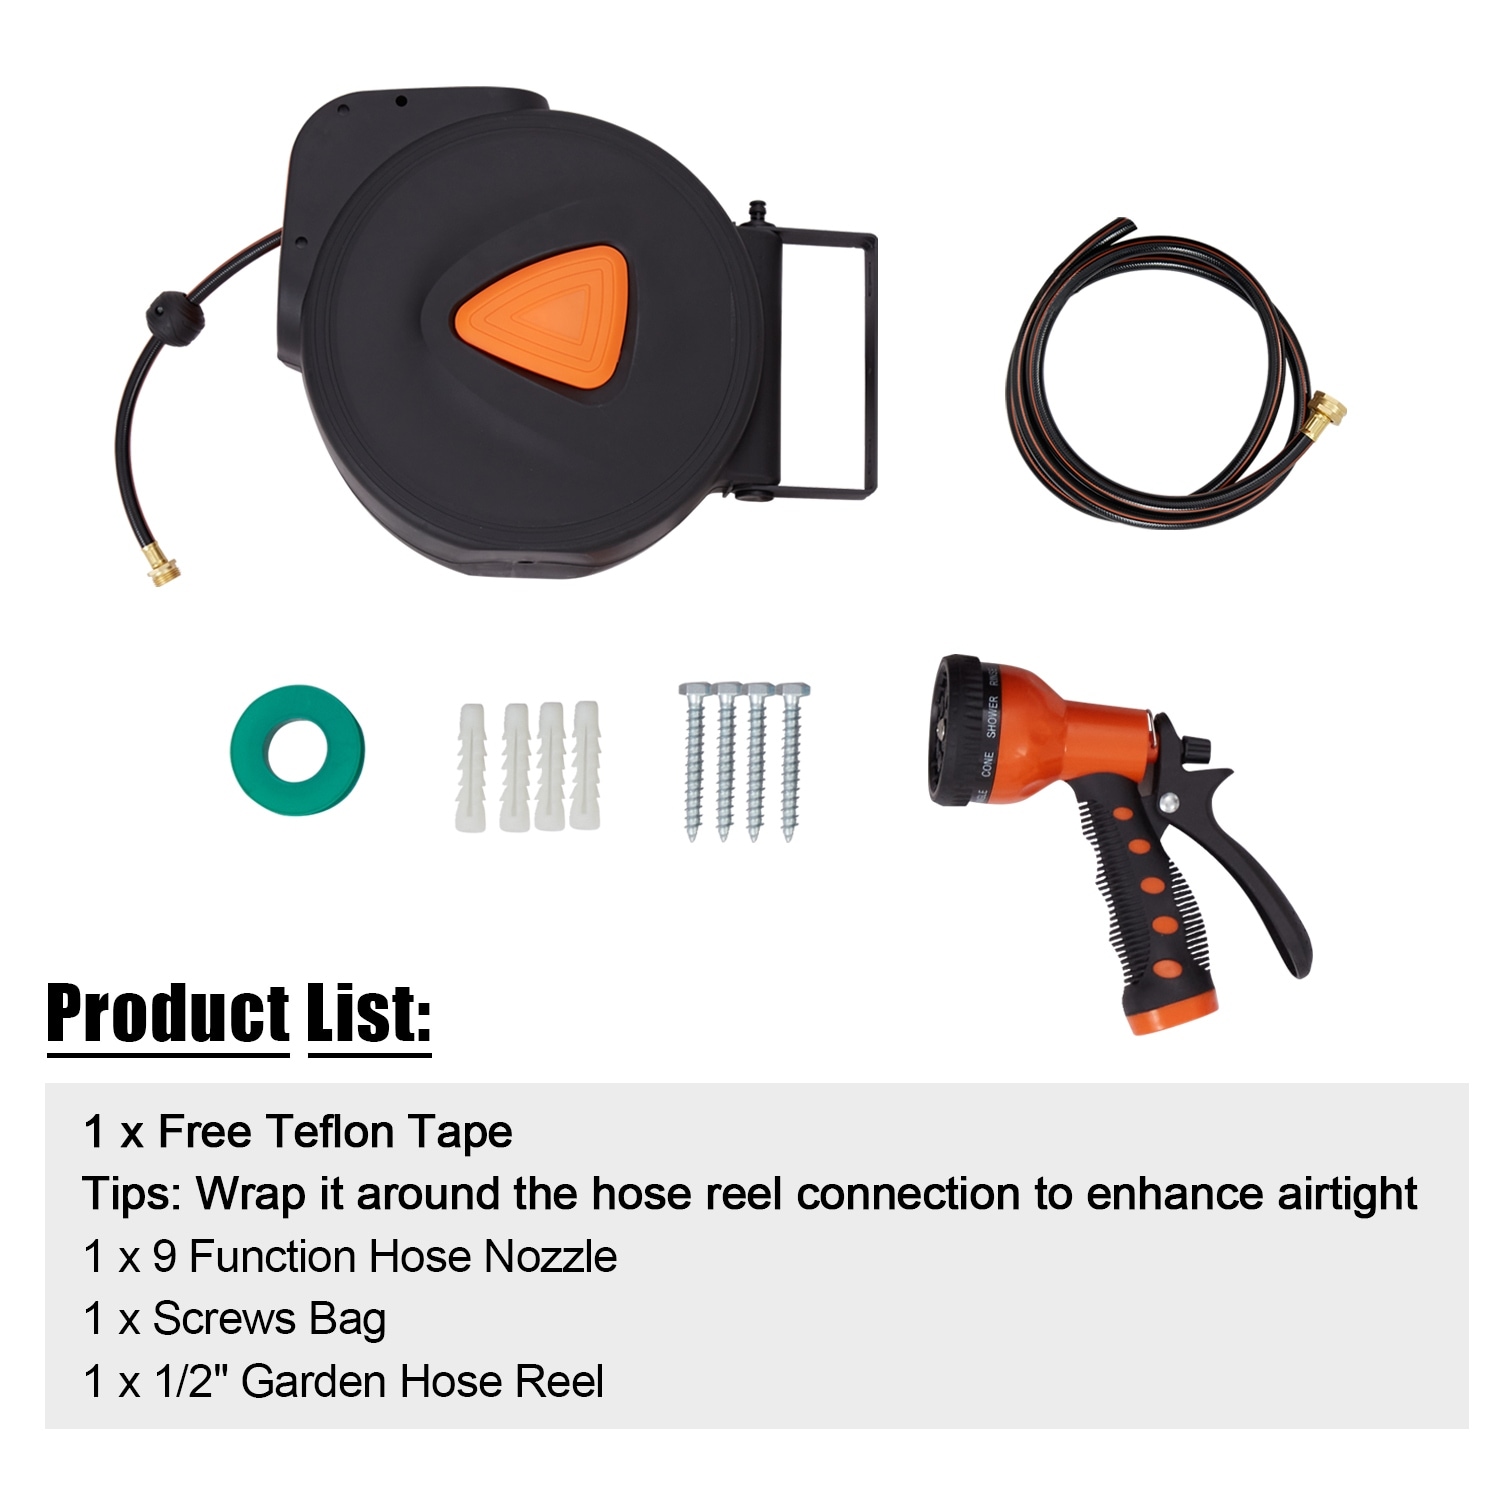 https://ak1.ostkcdn.com/images/products/is/images/direct/2321b254b24a0ae399a1c4ac98ce8196dde9848f/Retractable-Garden-Hose-Reel%2C-with-100FT-Water-Hose%2C-Wall-Mount-%26-180%C2%B0Swivel-Bracket.jpg